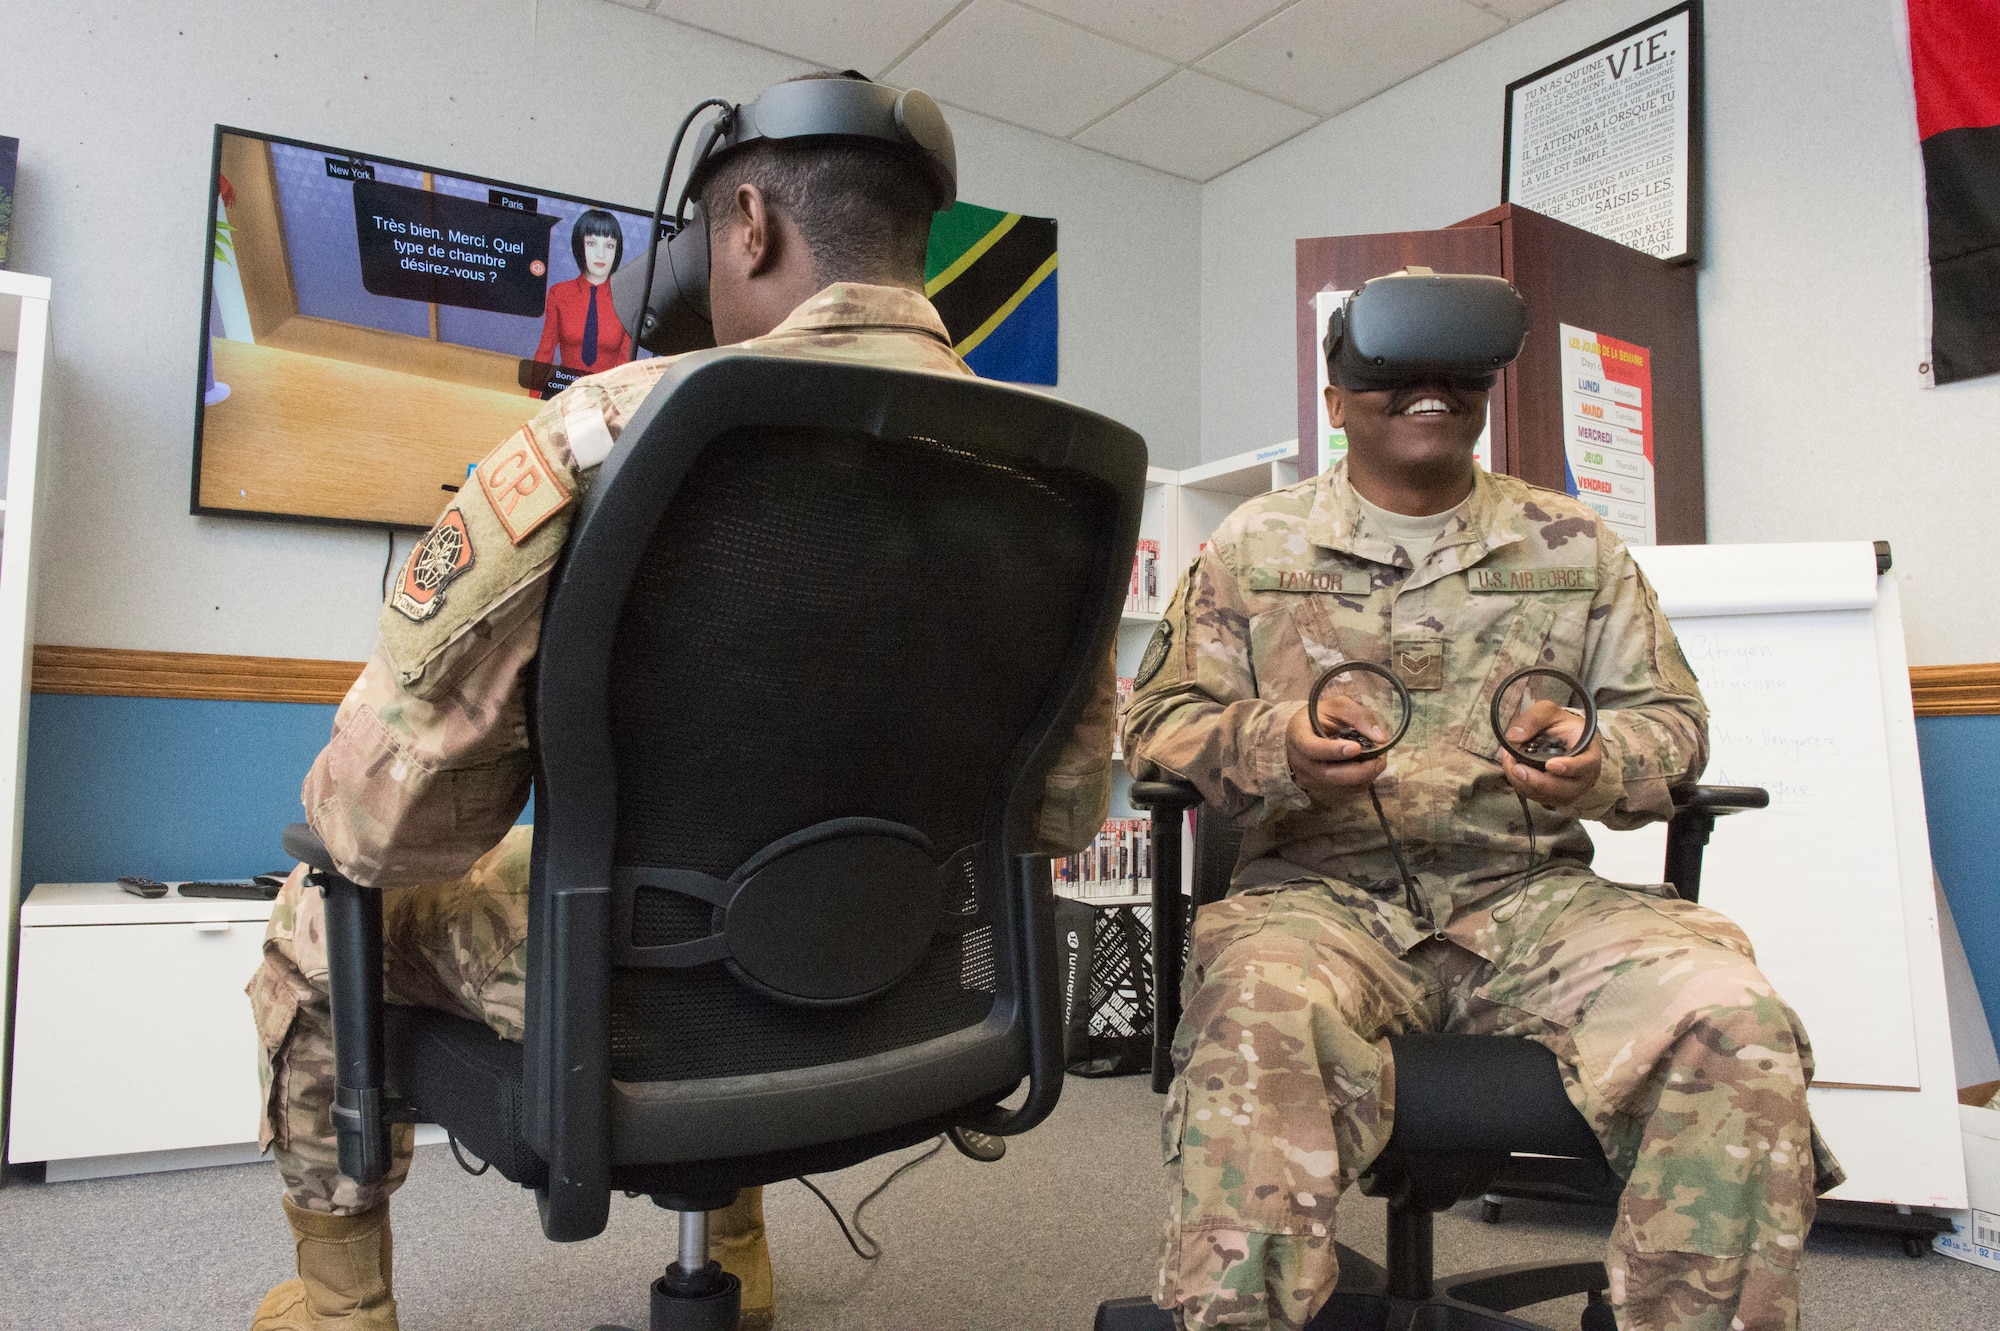 Airman 1st Class Etchy Tambe (left) and Senior Airman Trevaughn Taylor (right), 621st Contingency Response Squadron aerial porter journeymen, test out the French language virtual reality programs at the Language Learning Center at Joint Base McGuire-Dix-Lakehurst, New Jersey, Mar. 3, 2019. The LLC was created to help Airmen from the 818th Mobility Support Advisory Squadron maintain French language proficiency for their frequent trips to Africa in support of developing air mobility capabilities. (U.S. Air Force photo by Staff Sgt. Sarah Brice)